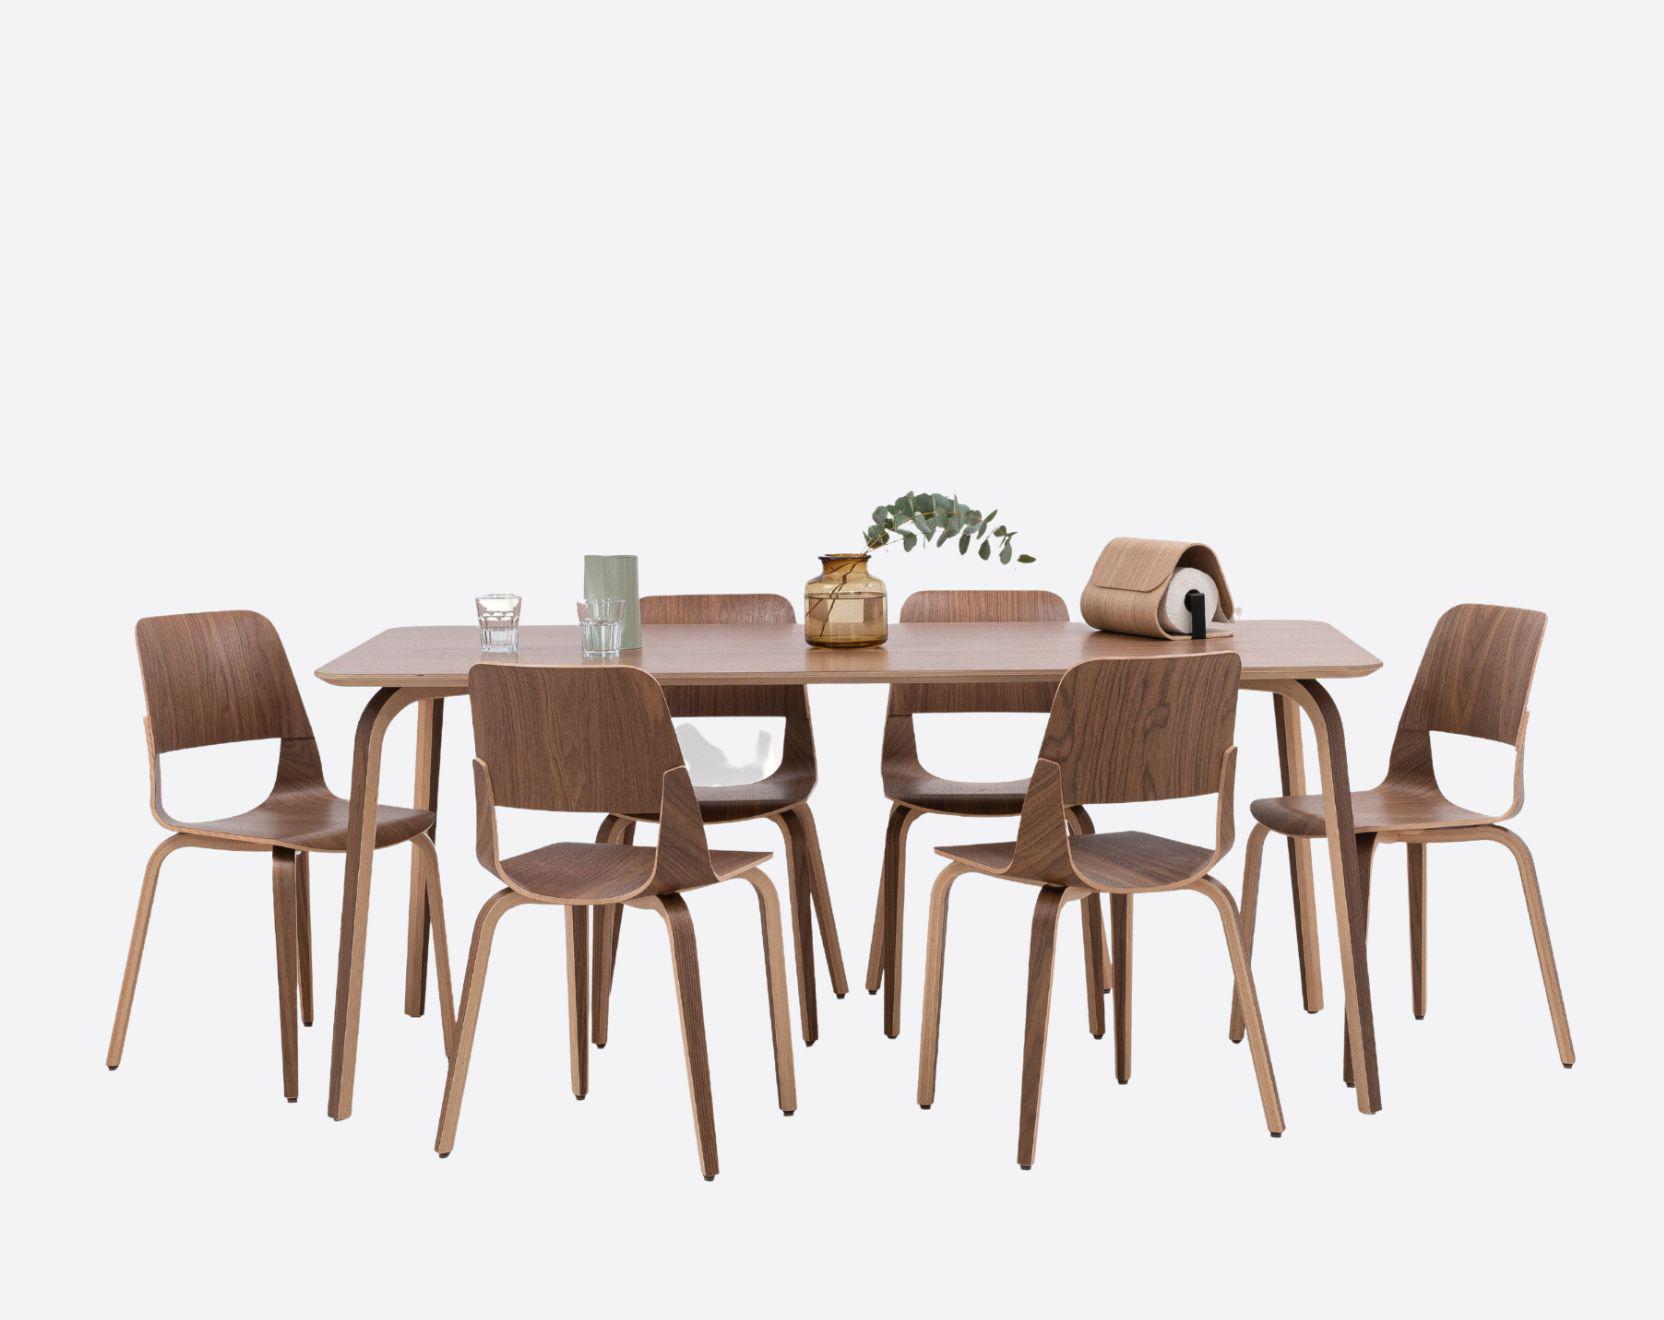 Dining set of walnut table and 6 chairs